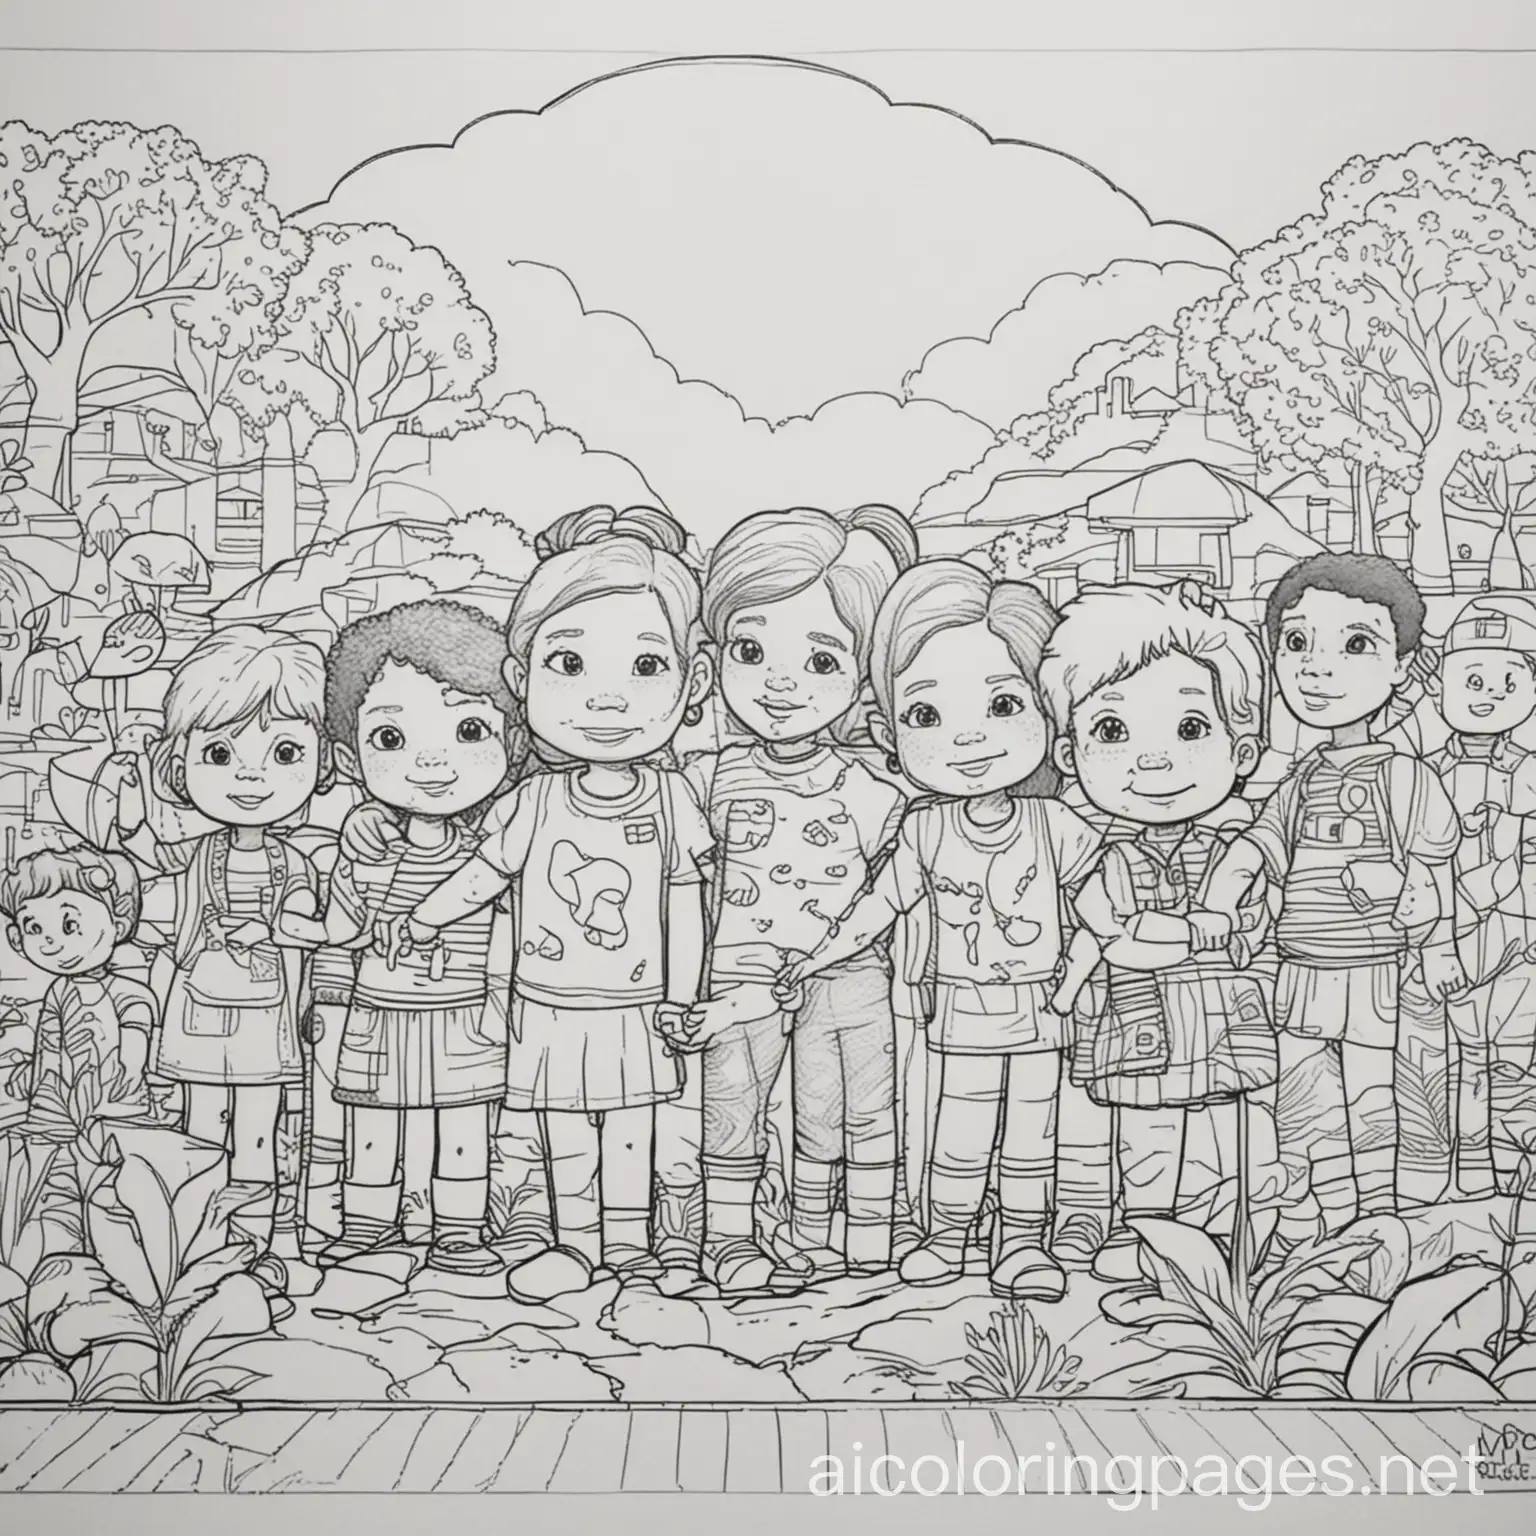 Advancing Equity and Diversity in Early Childhood Education poster, Coloring Page, black and white, line art, white background, Simplicity, Ample White Space. The background of the coloring page is plain white to make it easy for young children to color within the lines. The outlines of all the subjects are easy to distinguish, making it simple for kids to color without too much difficulty